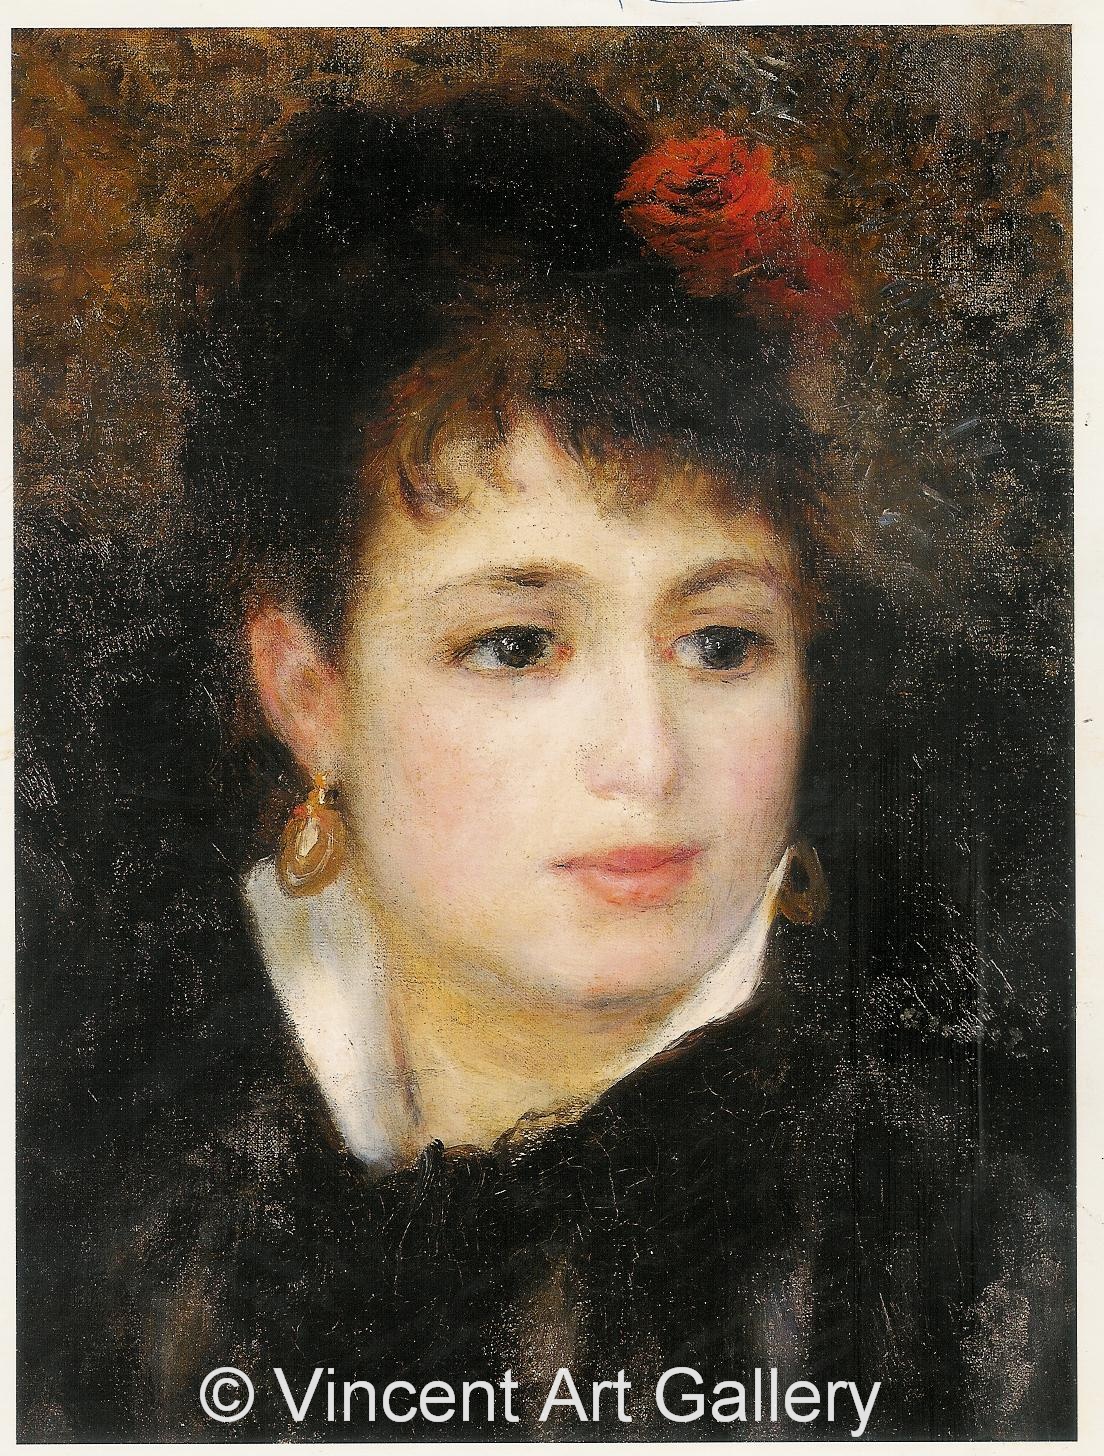 A2608, RENOIR, Woman with a Rose 001